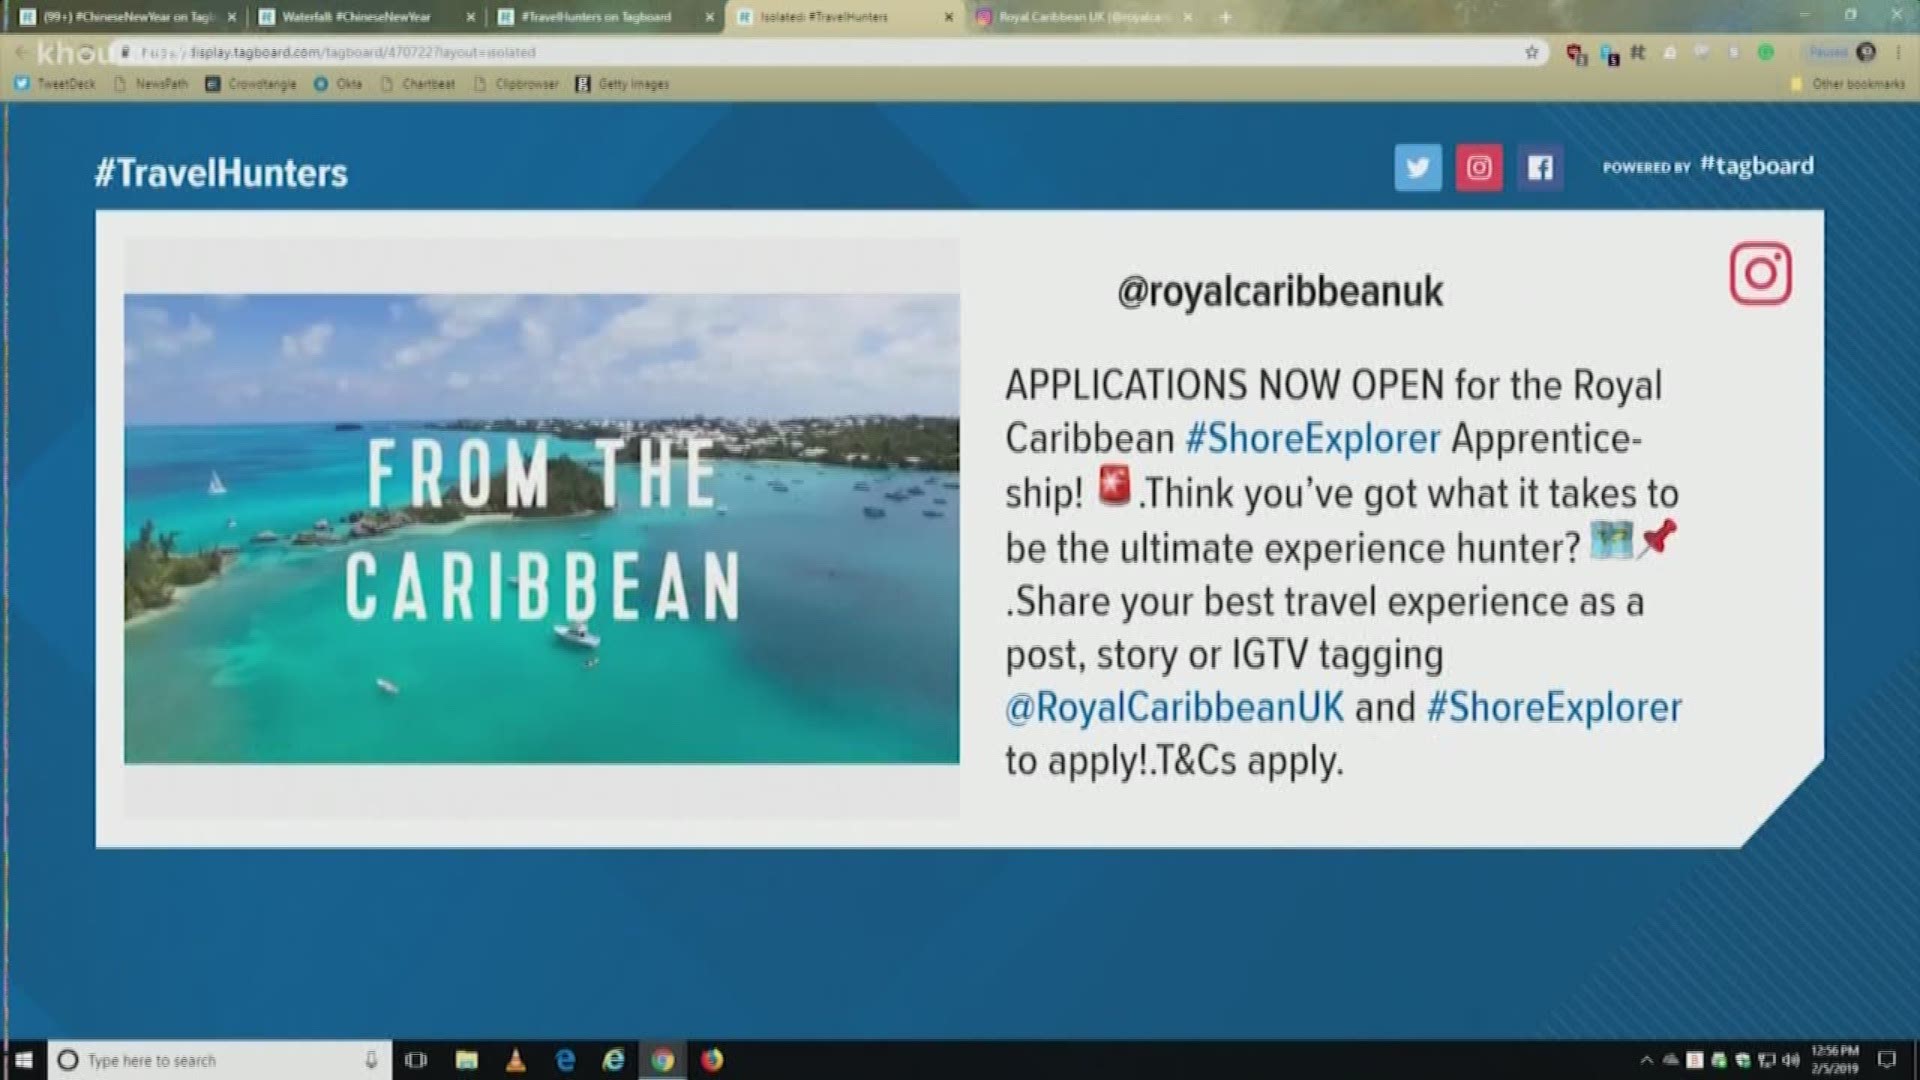 Looking for a dream job? Royal Caribbean is offering one lucky person the chance to get paid to travel the world.